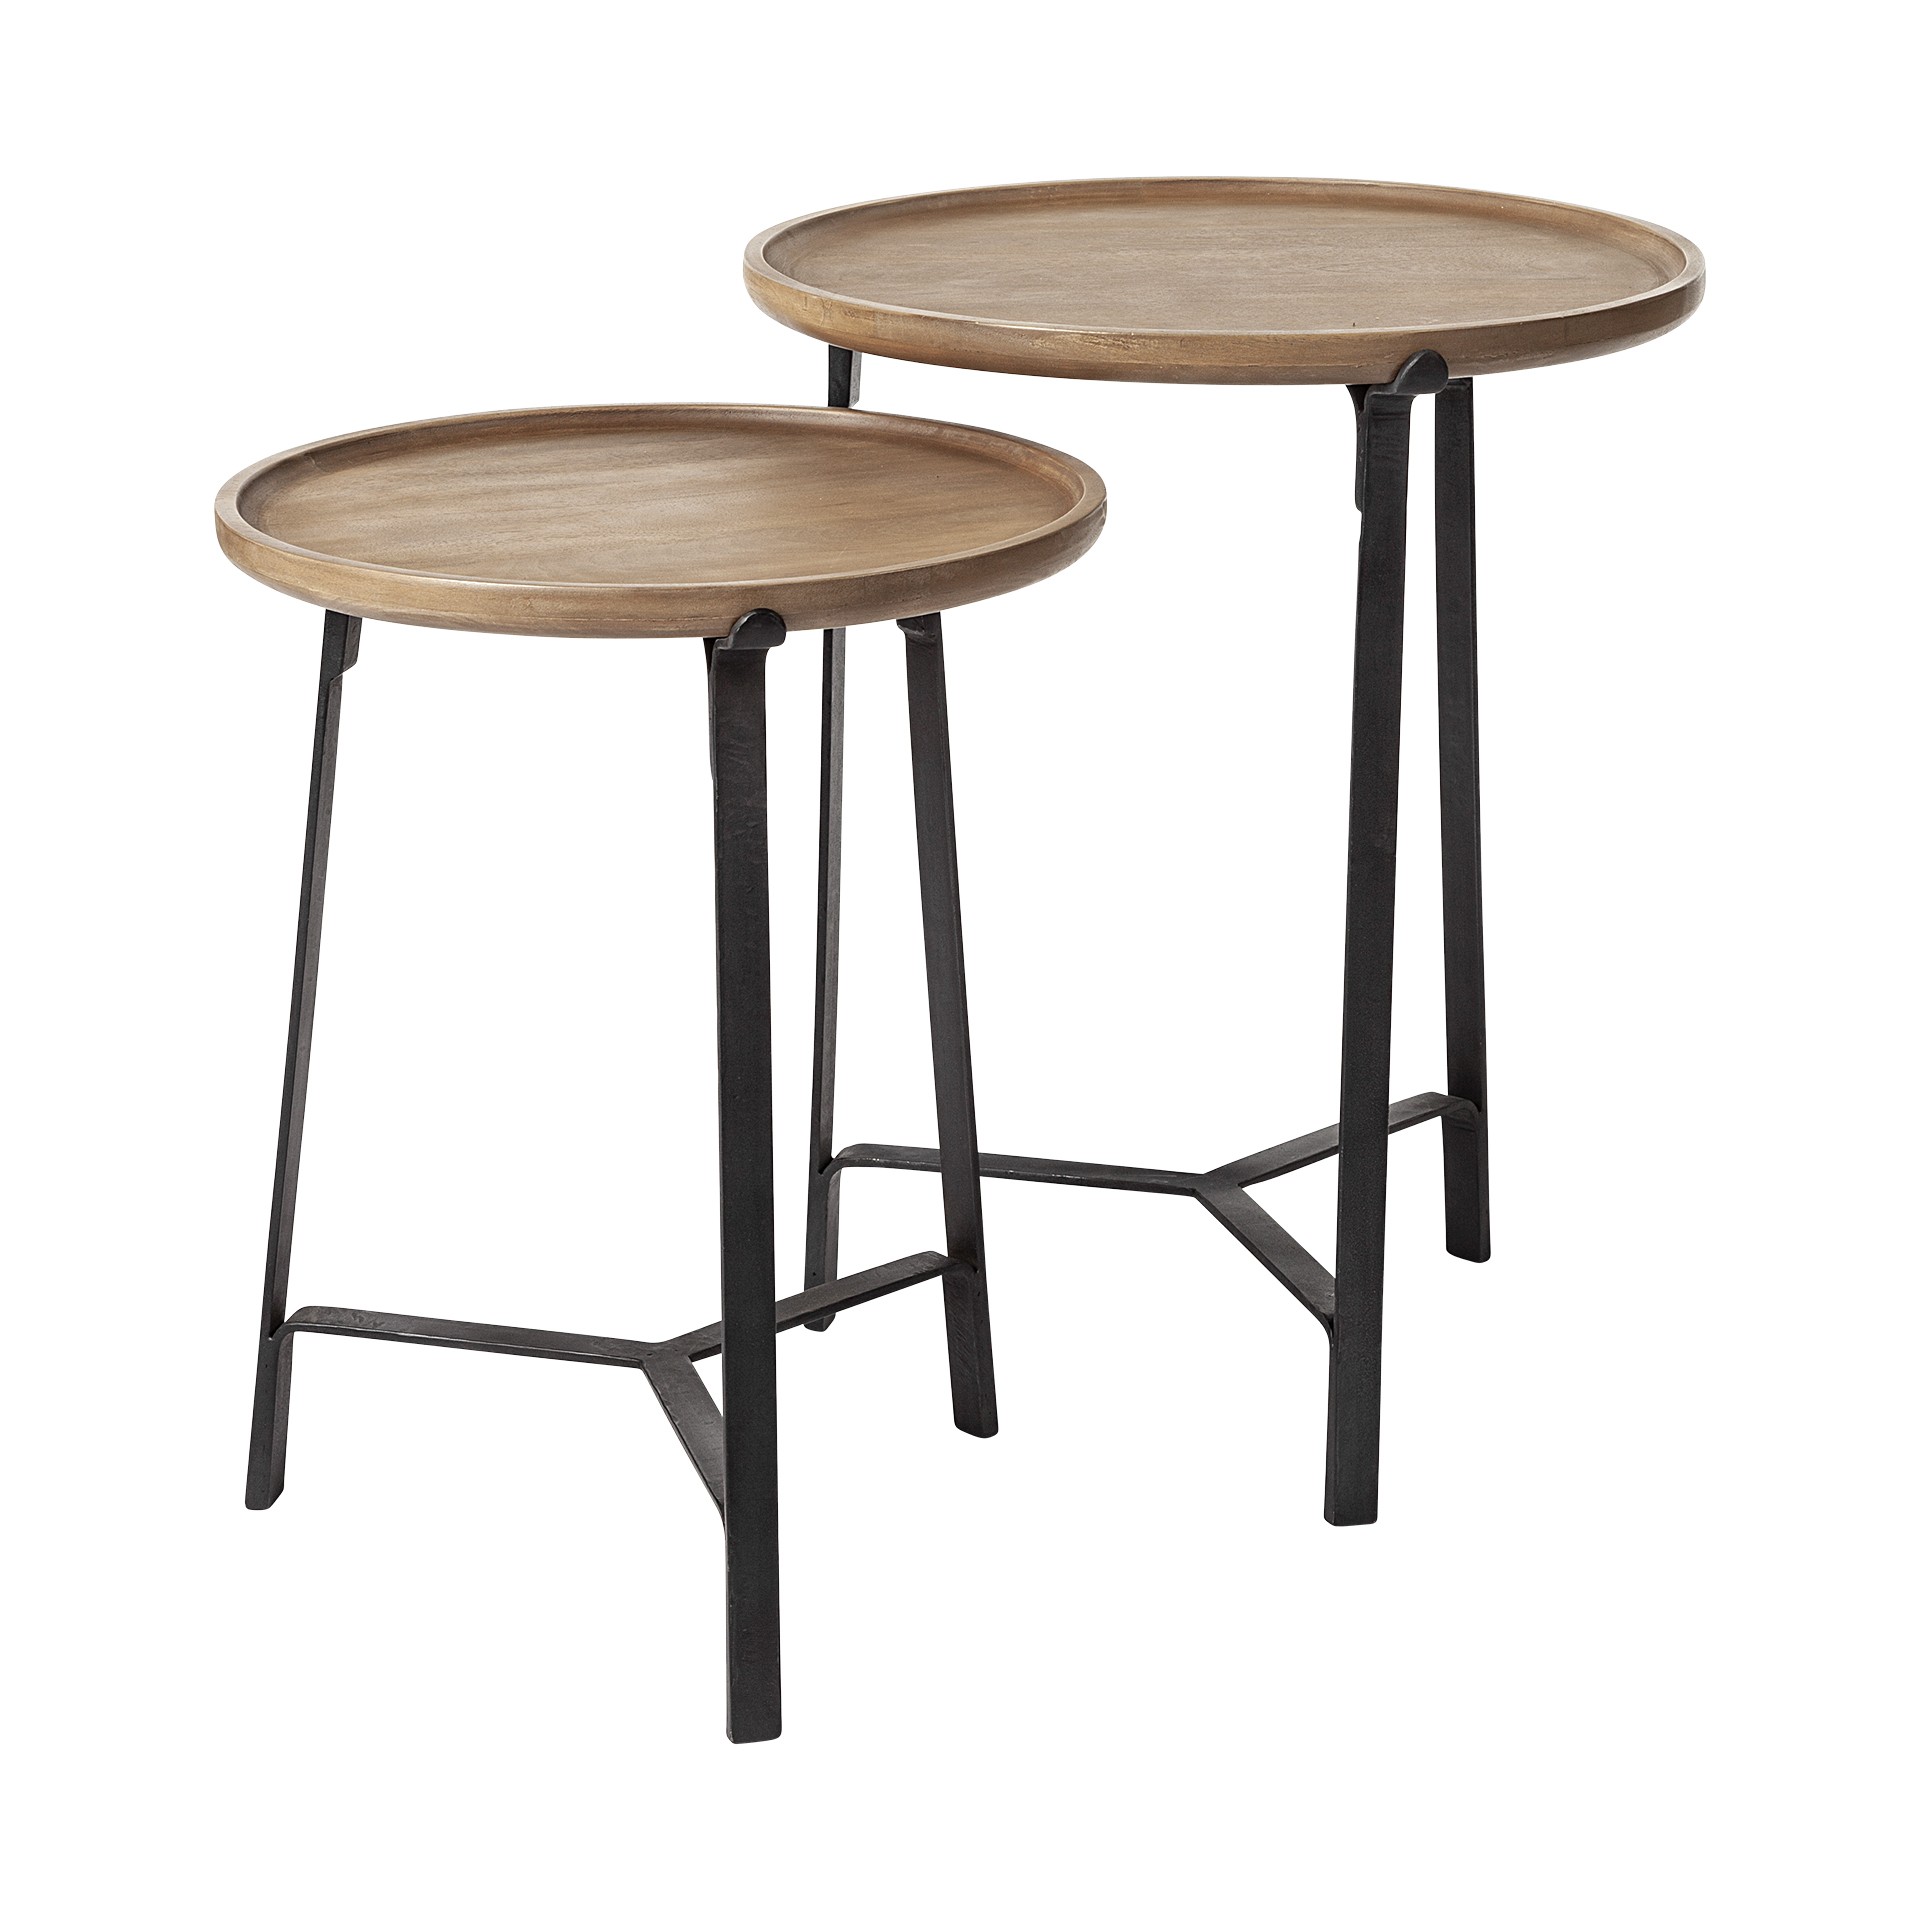 Set of 2 Round Brown Solid Wood Iron Base Nesting Side Tables